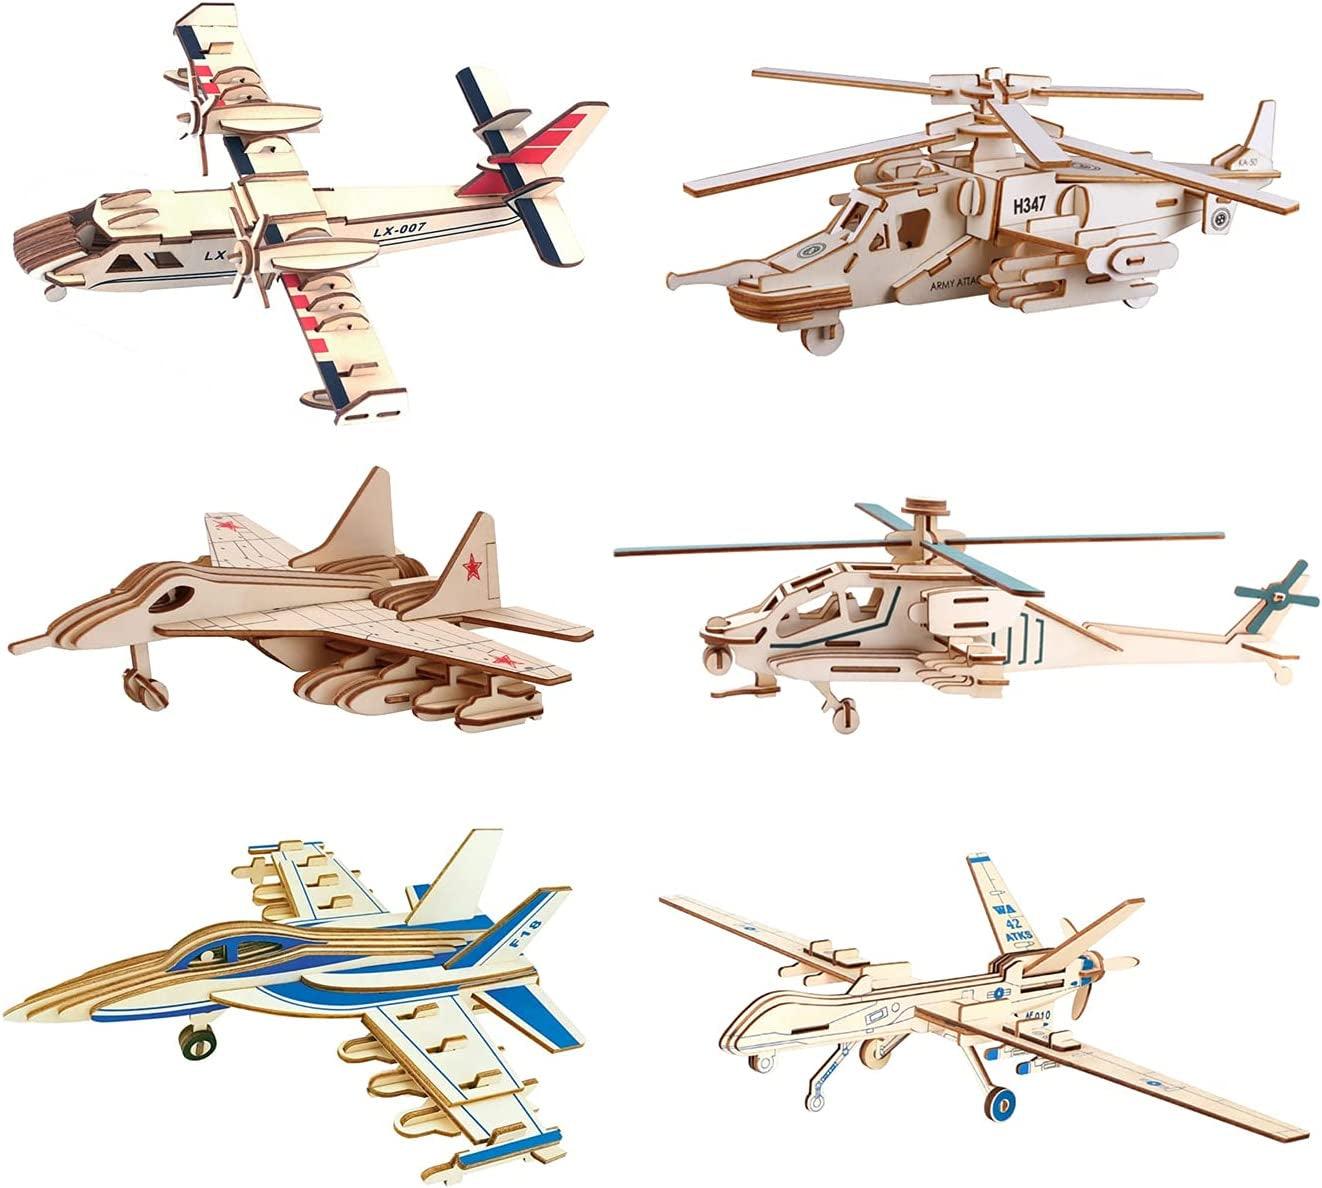 3D Wooden Puzzle - 6 Piece Set Aircraft & Helicopter Wooden Crafts Assembly Building Model Kits - WoodArtSupply